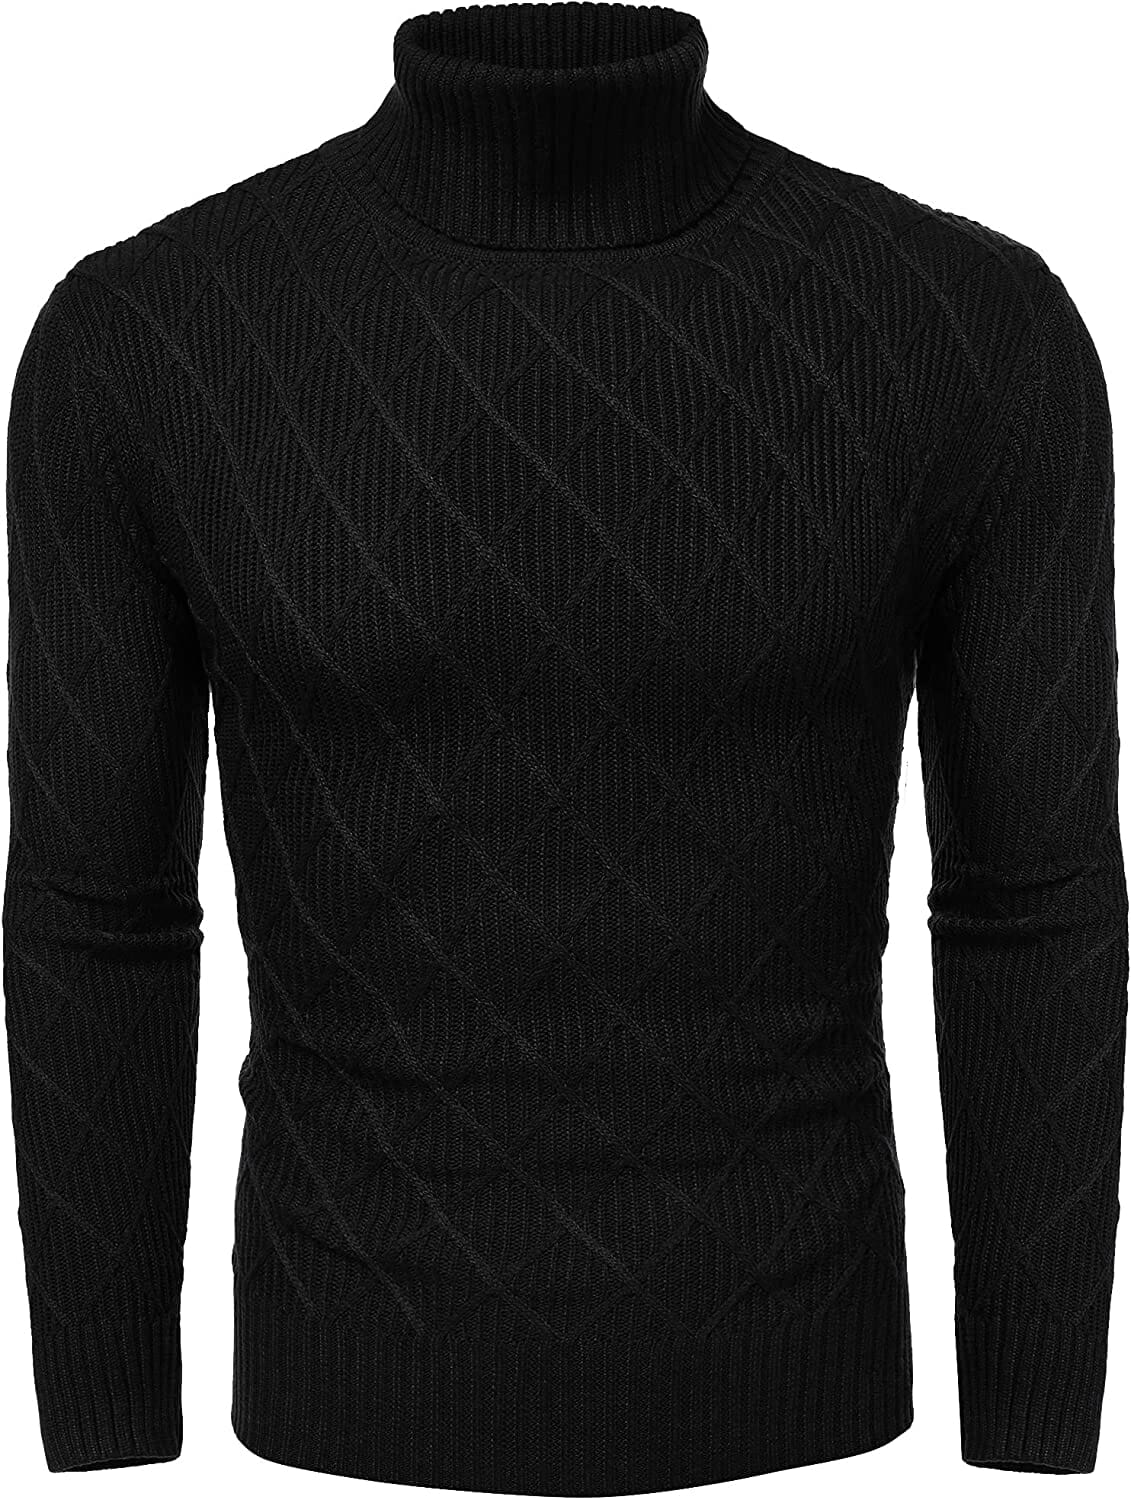 Slim Fit Thick Cotton Pullover Turtleneck Sweaters (US Only) Sweaters COOFANDY Store Black S 